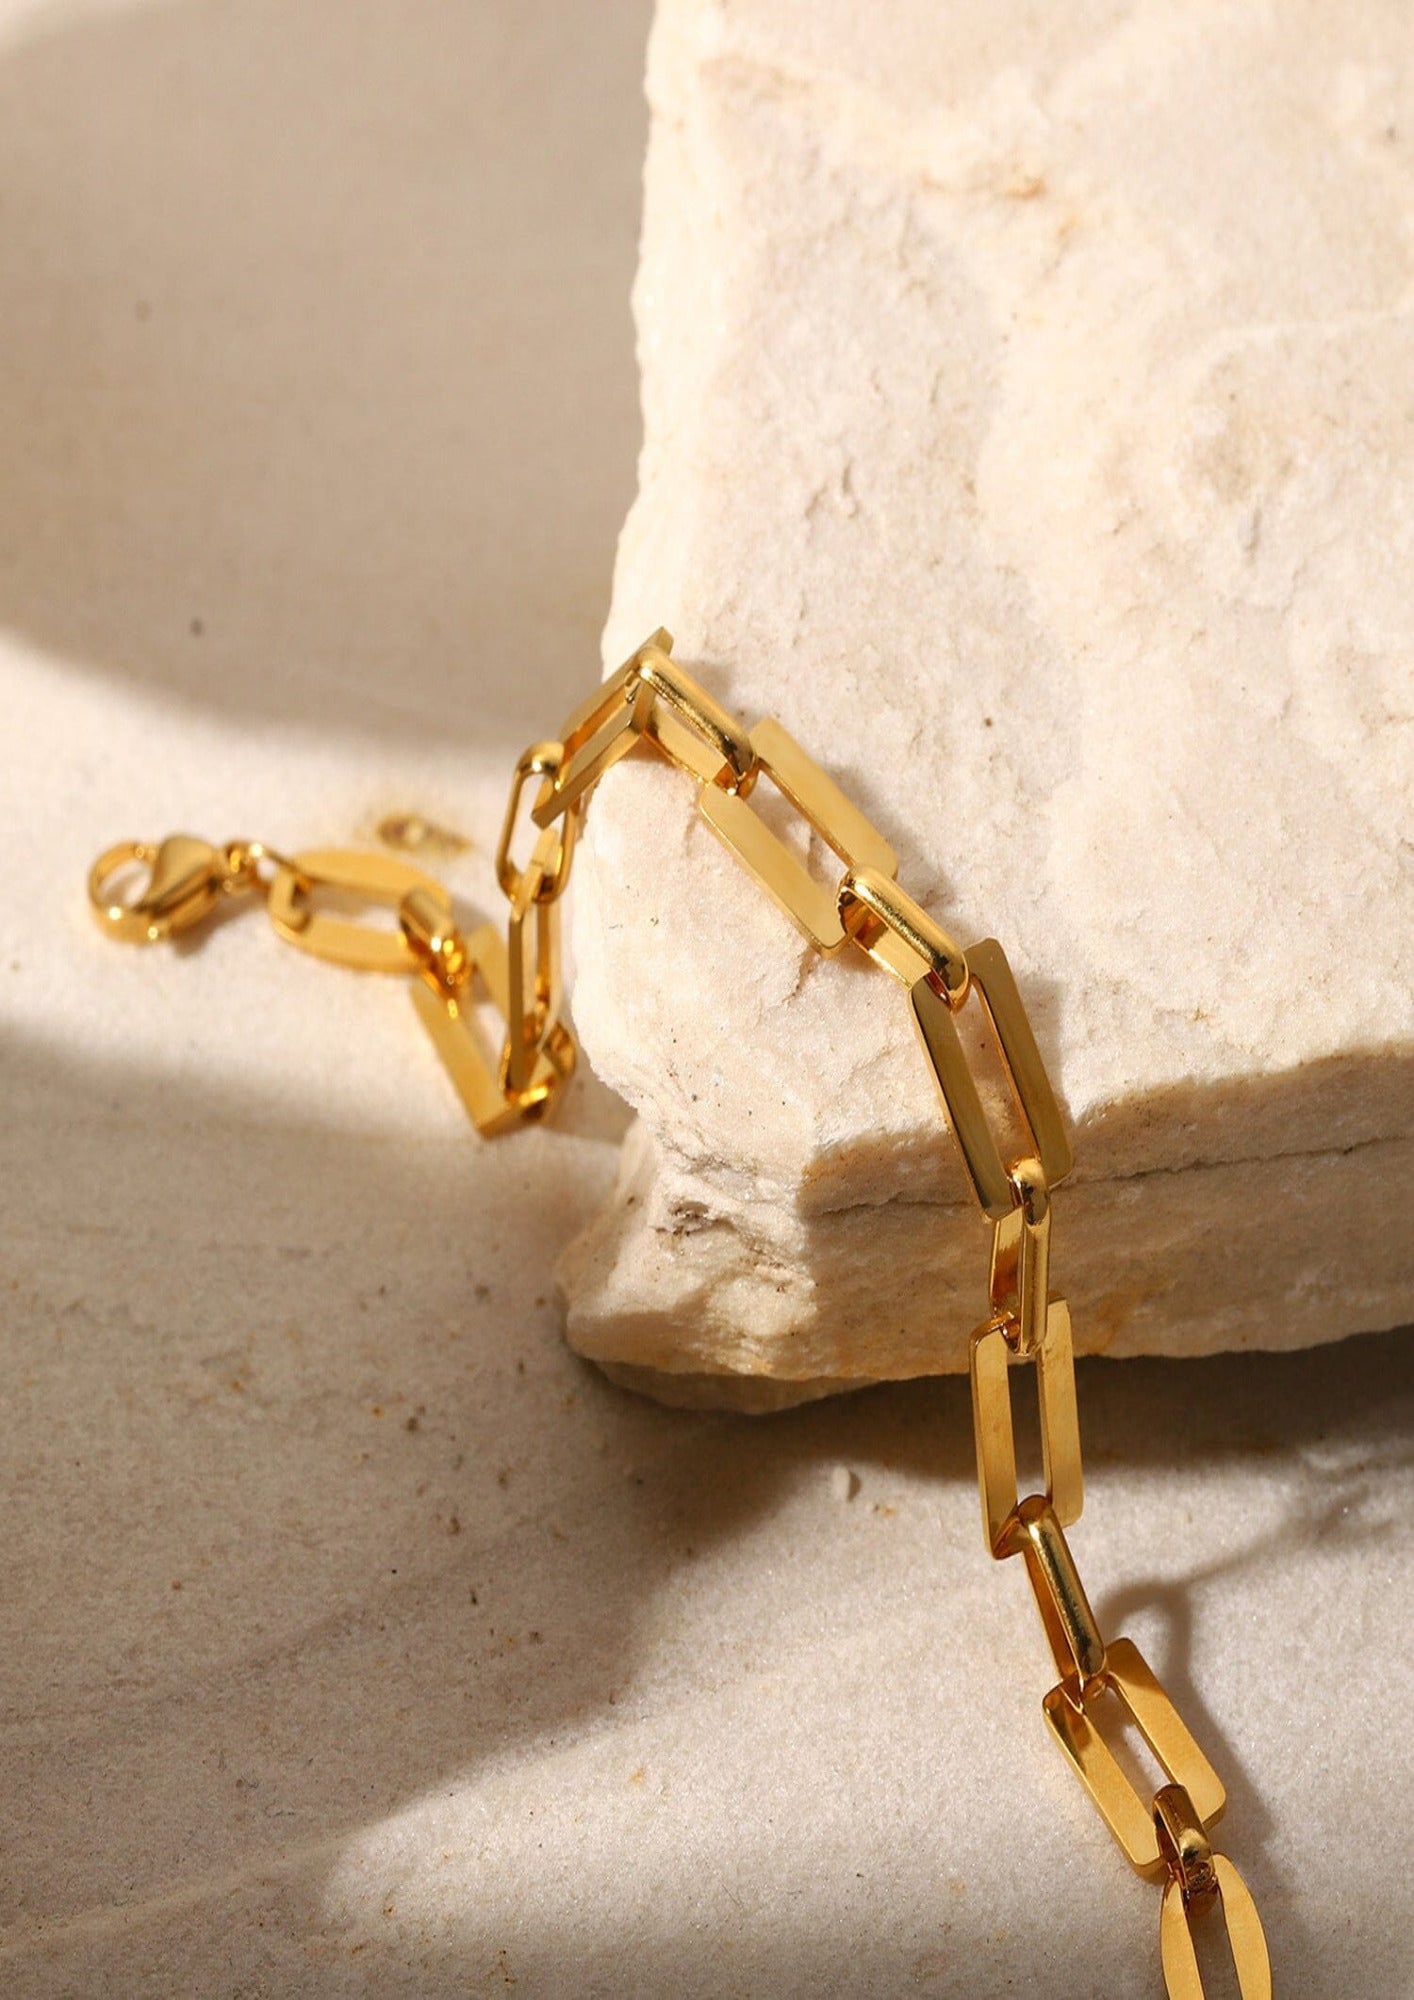 18K Gold-plated Square Chain Bracelet braclet Yubama Jewelry Online Store - The Elegant Designs of Gold and Silver ! 